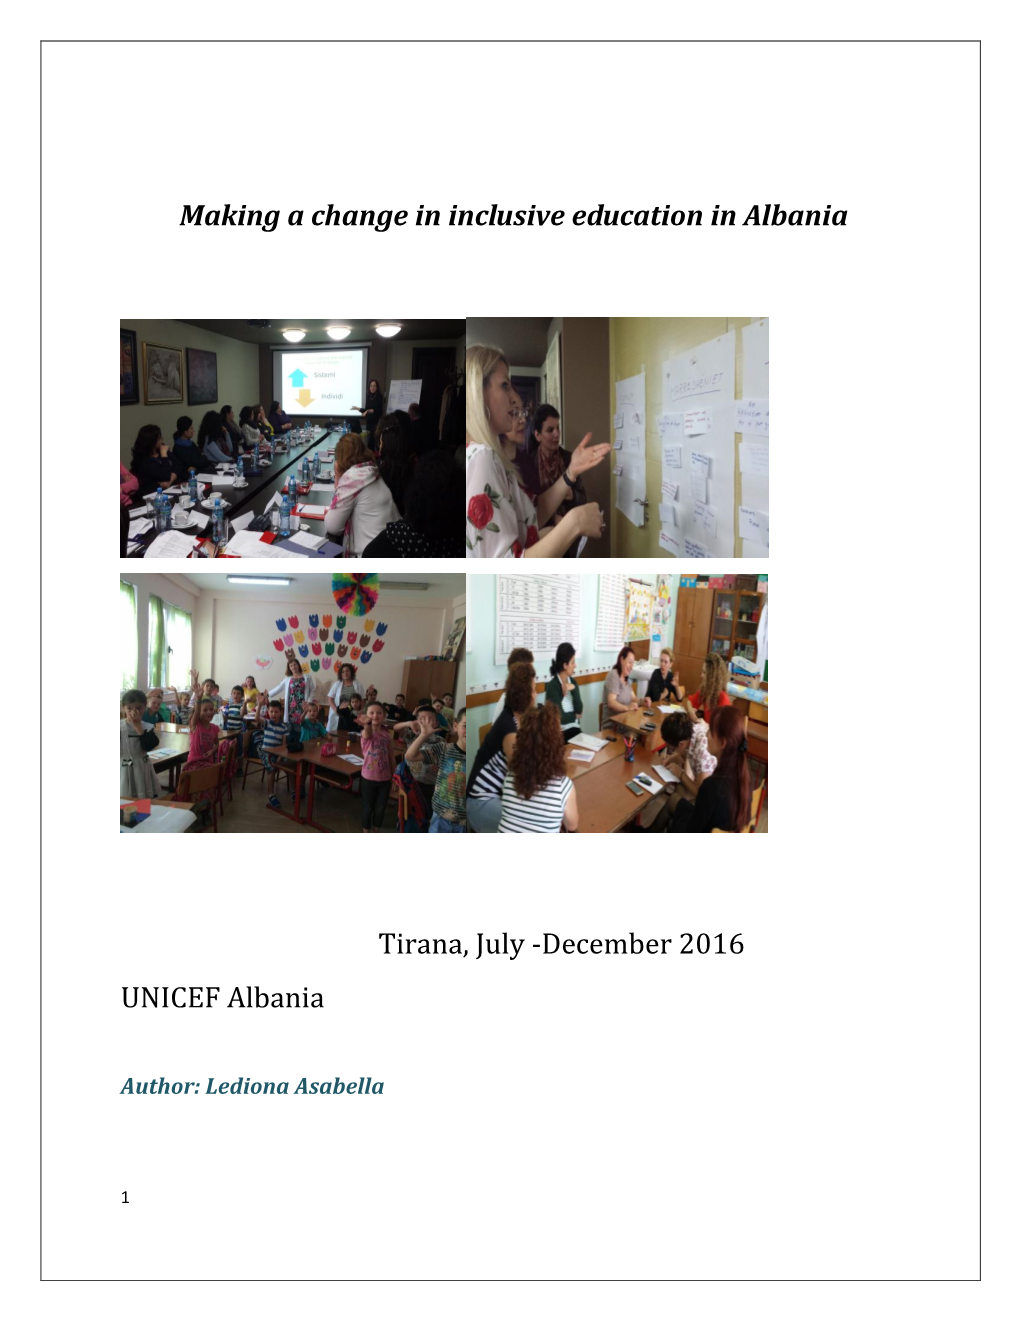 Making a Change in Inclusive Education in Albania